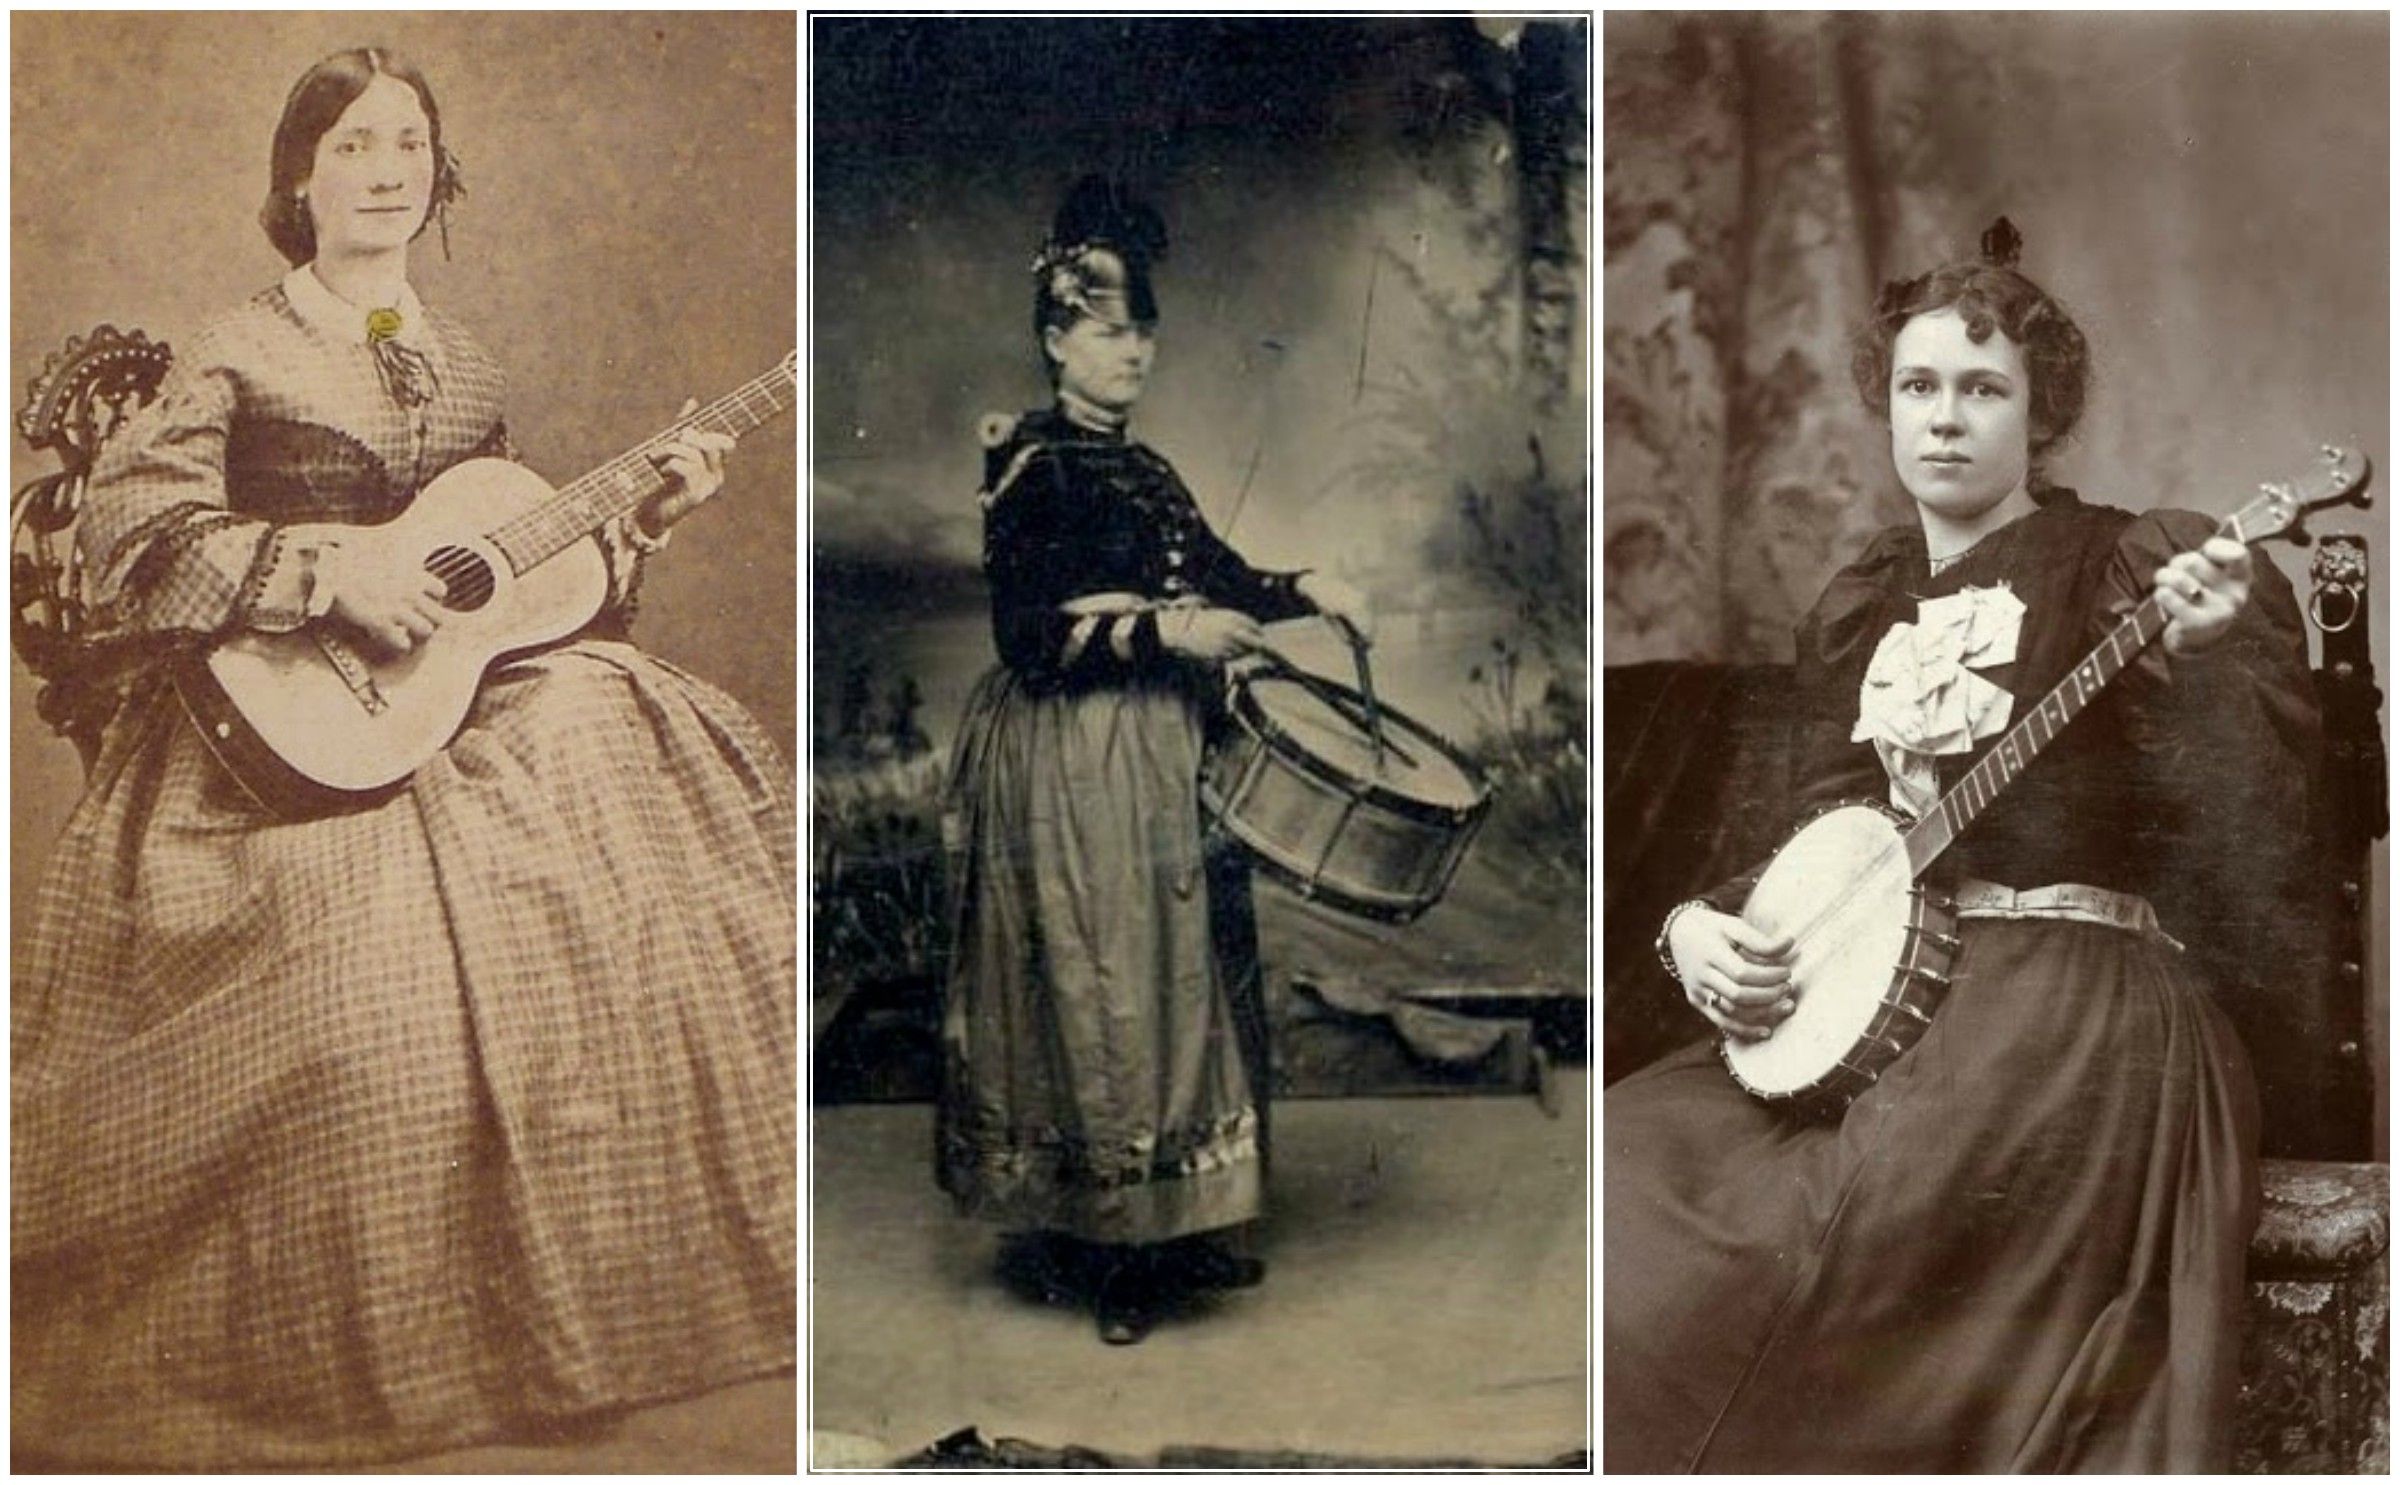 The Evolution of Women’s Role in Music during the 19th Century